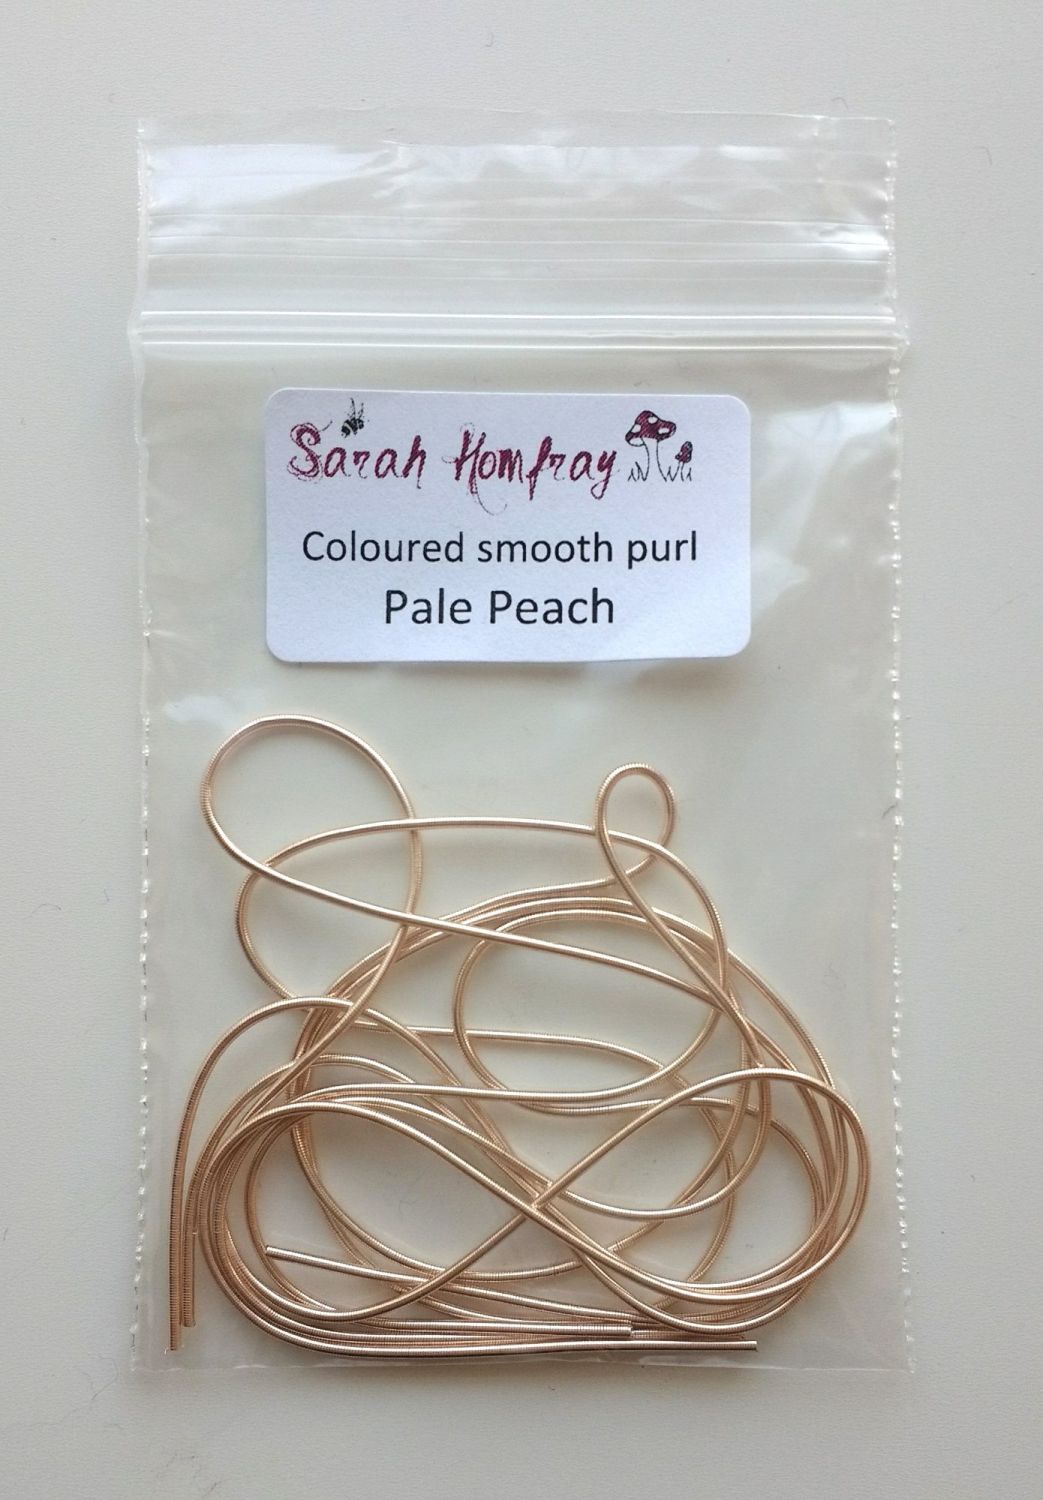 NEW! Coloured smooth purl no.6 - Pale Peach